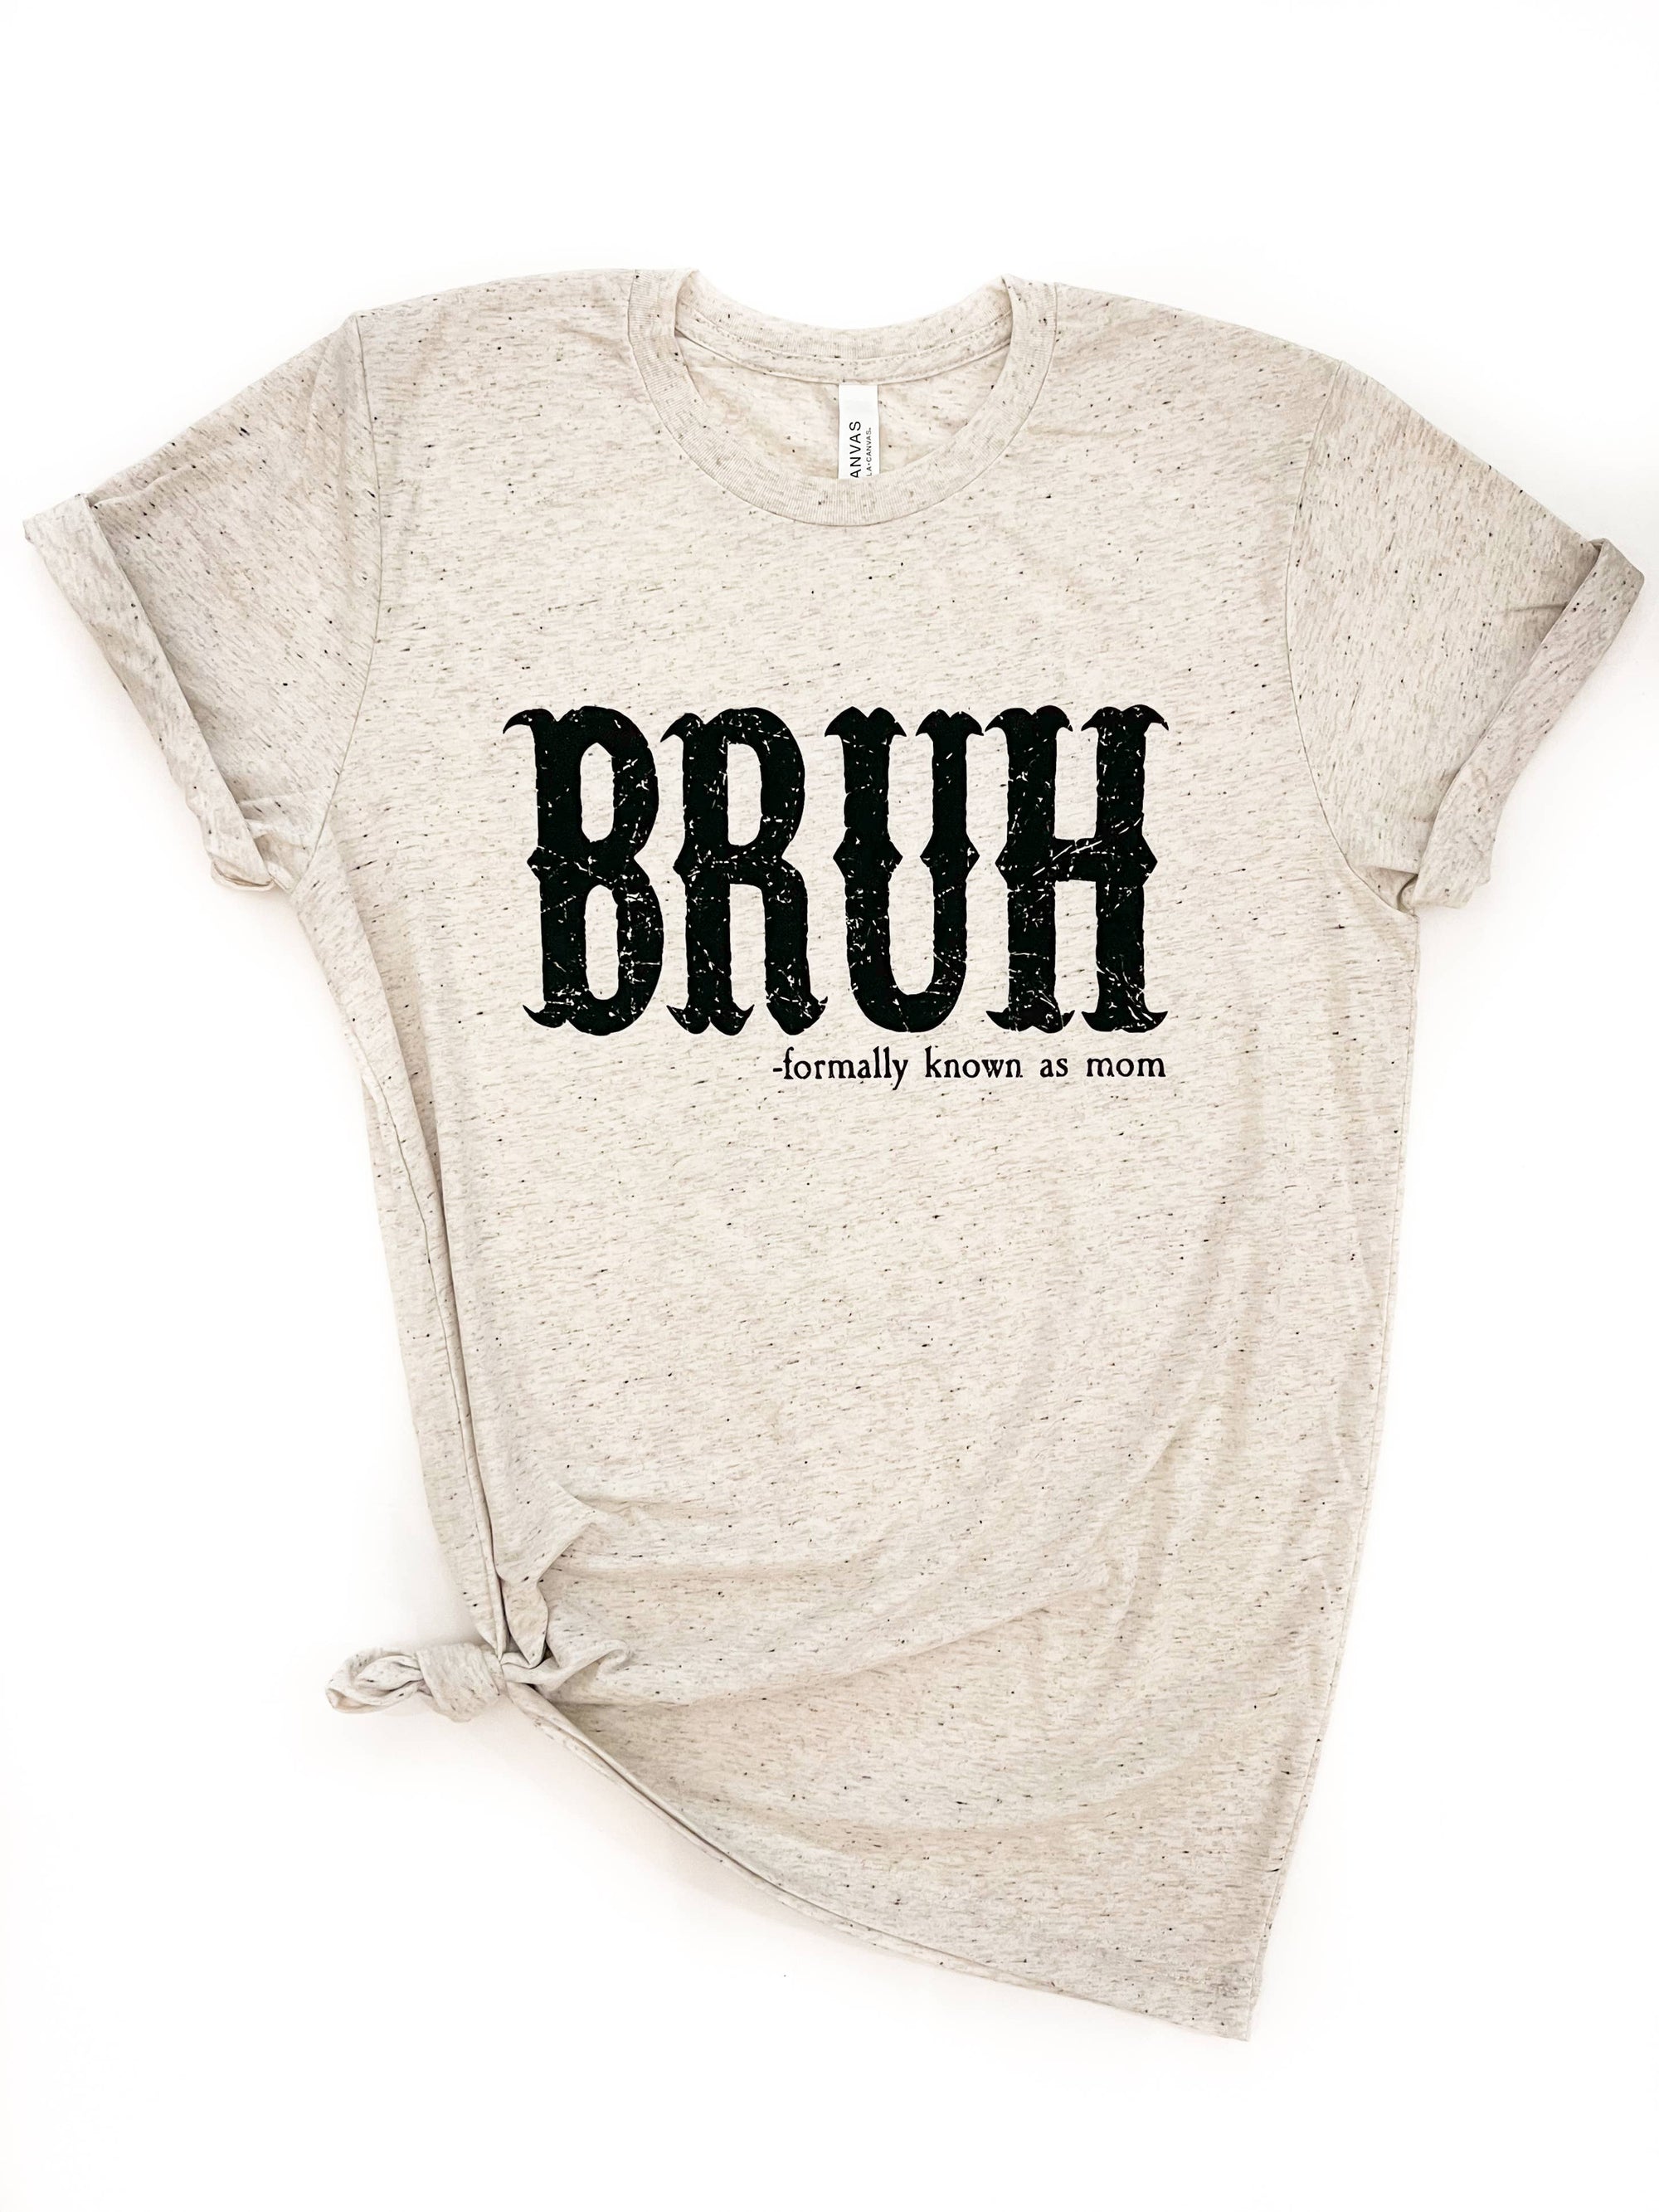 Bruh Formerly Known as Mom Funny Mom Tee: X-Large